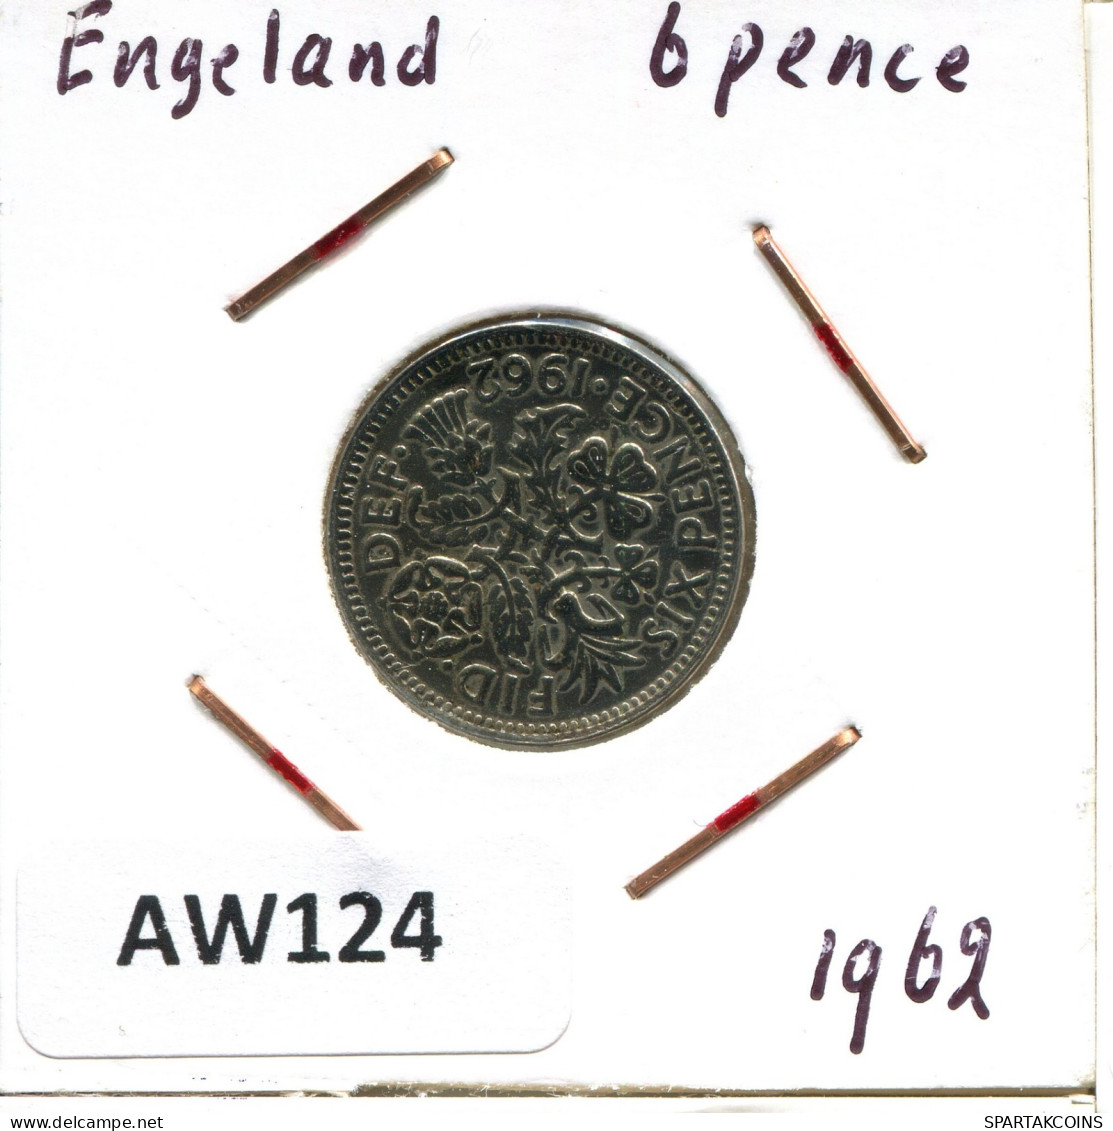 SIXPENCE 1962 UK GREAT BRITAIN Coin #AW124.U.A - H. 6 Pence